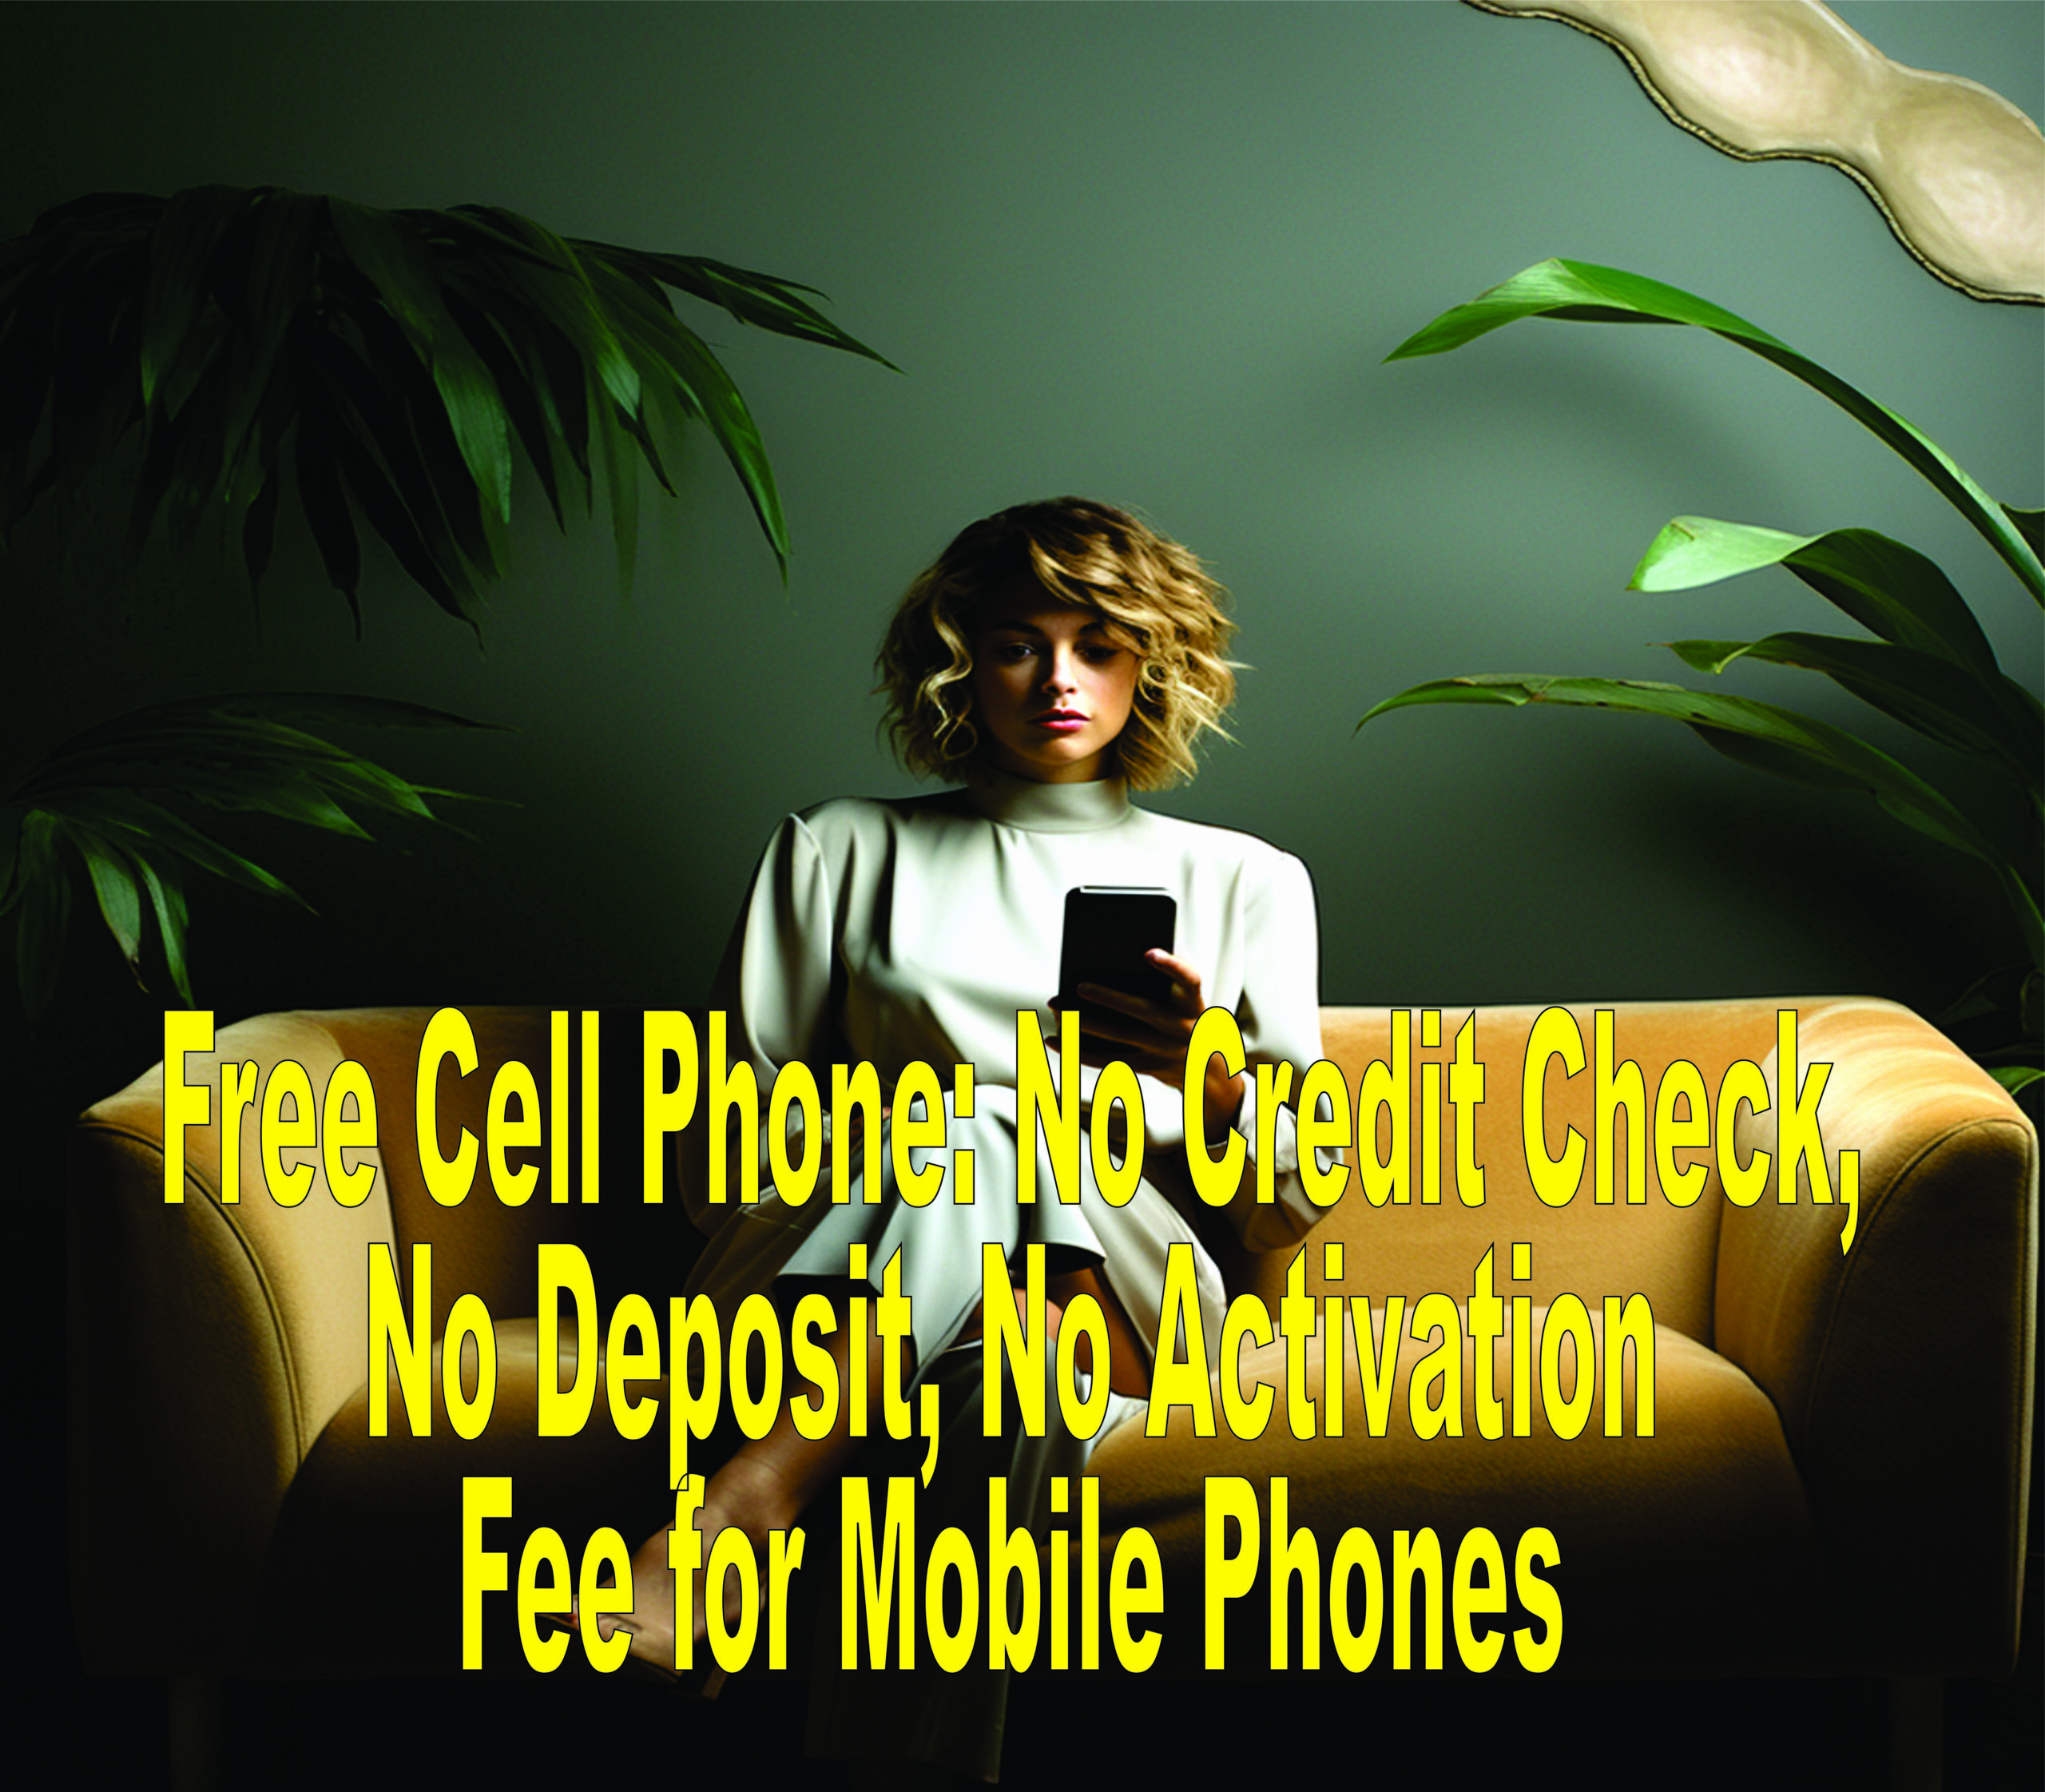 Free Cell Phone No Credit Check, No Deposit, No Activation Fee For Mobile Phones